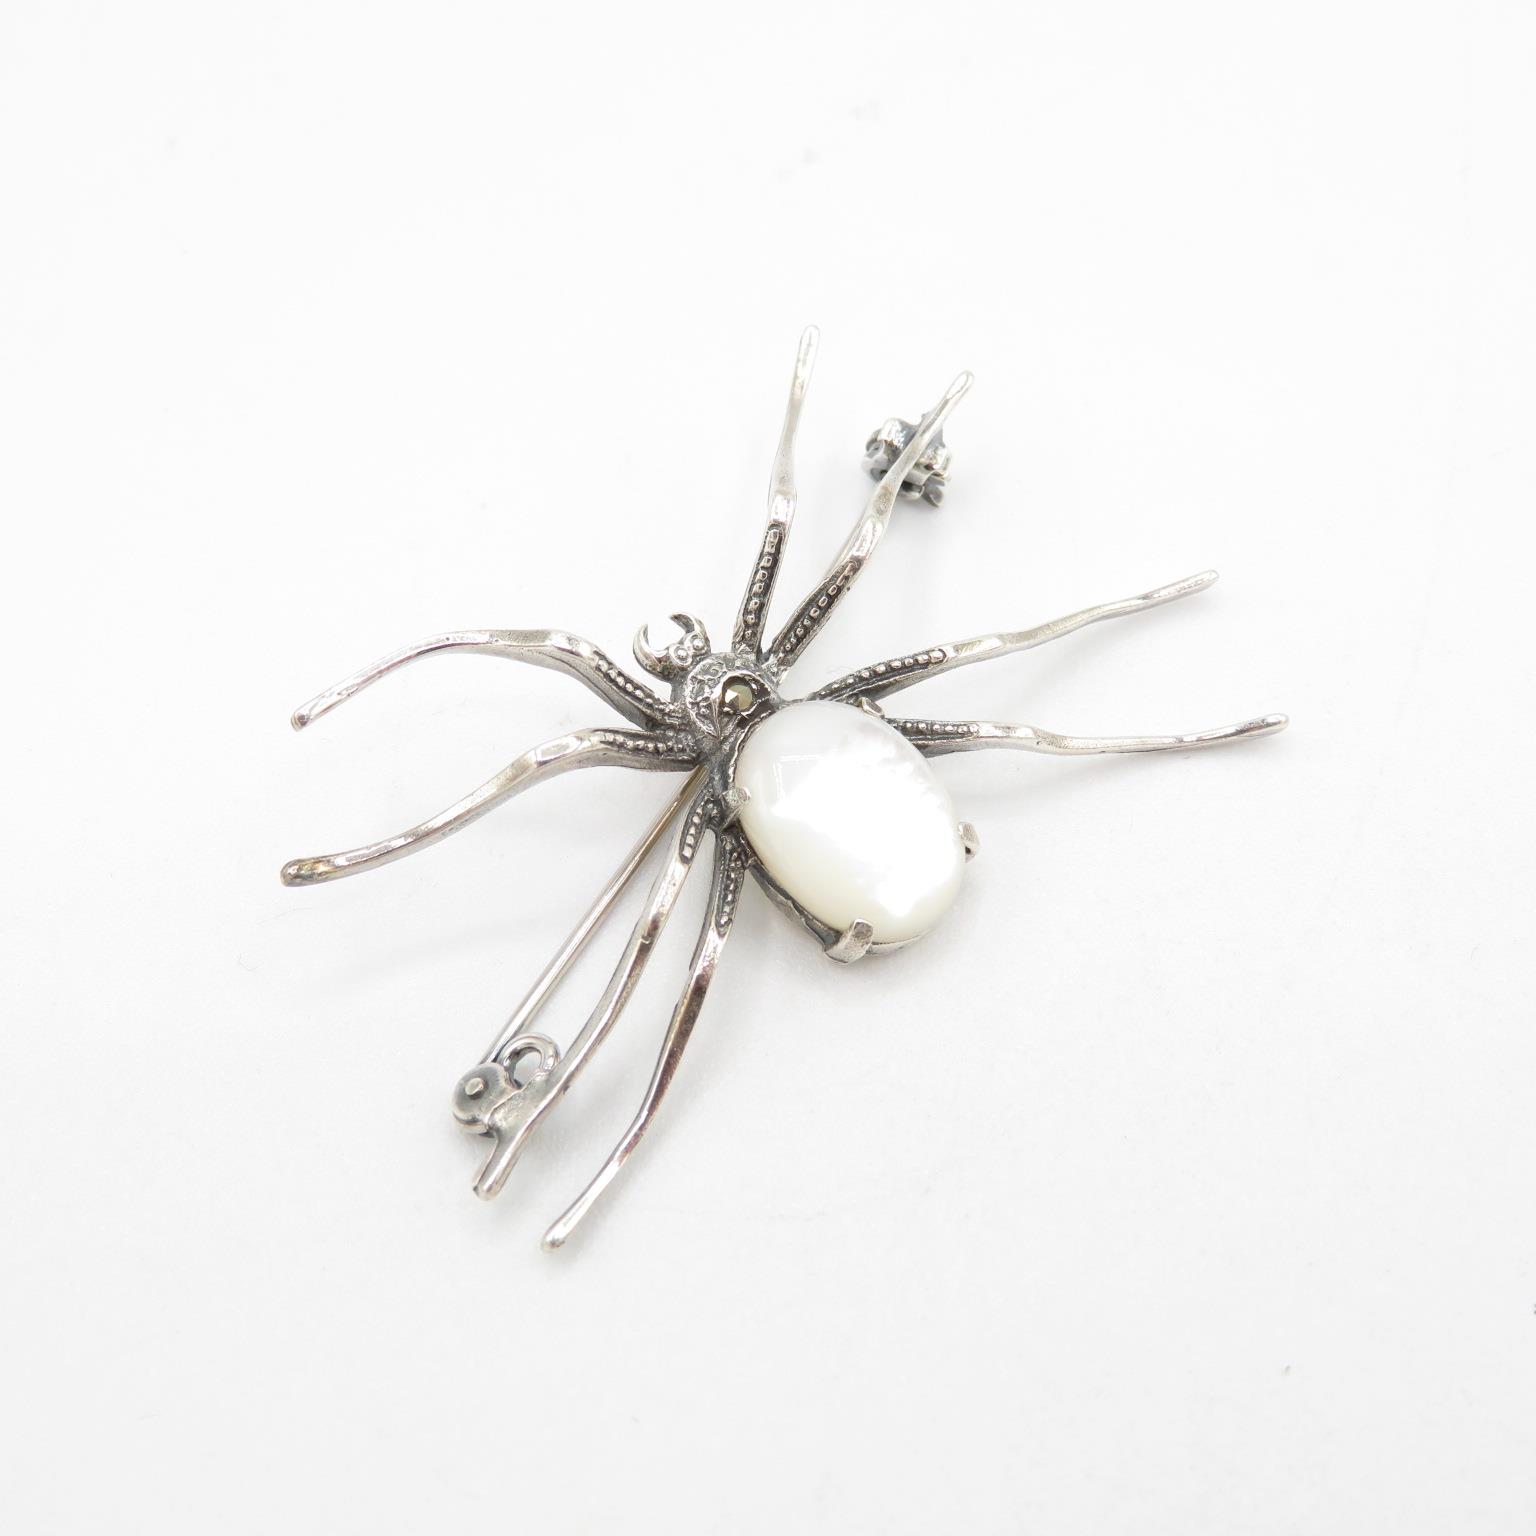 HM 925 Sterling Silver spider brooch with tight fitting bar catch, decorated with milky gemstone (